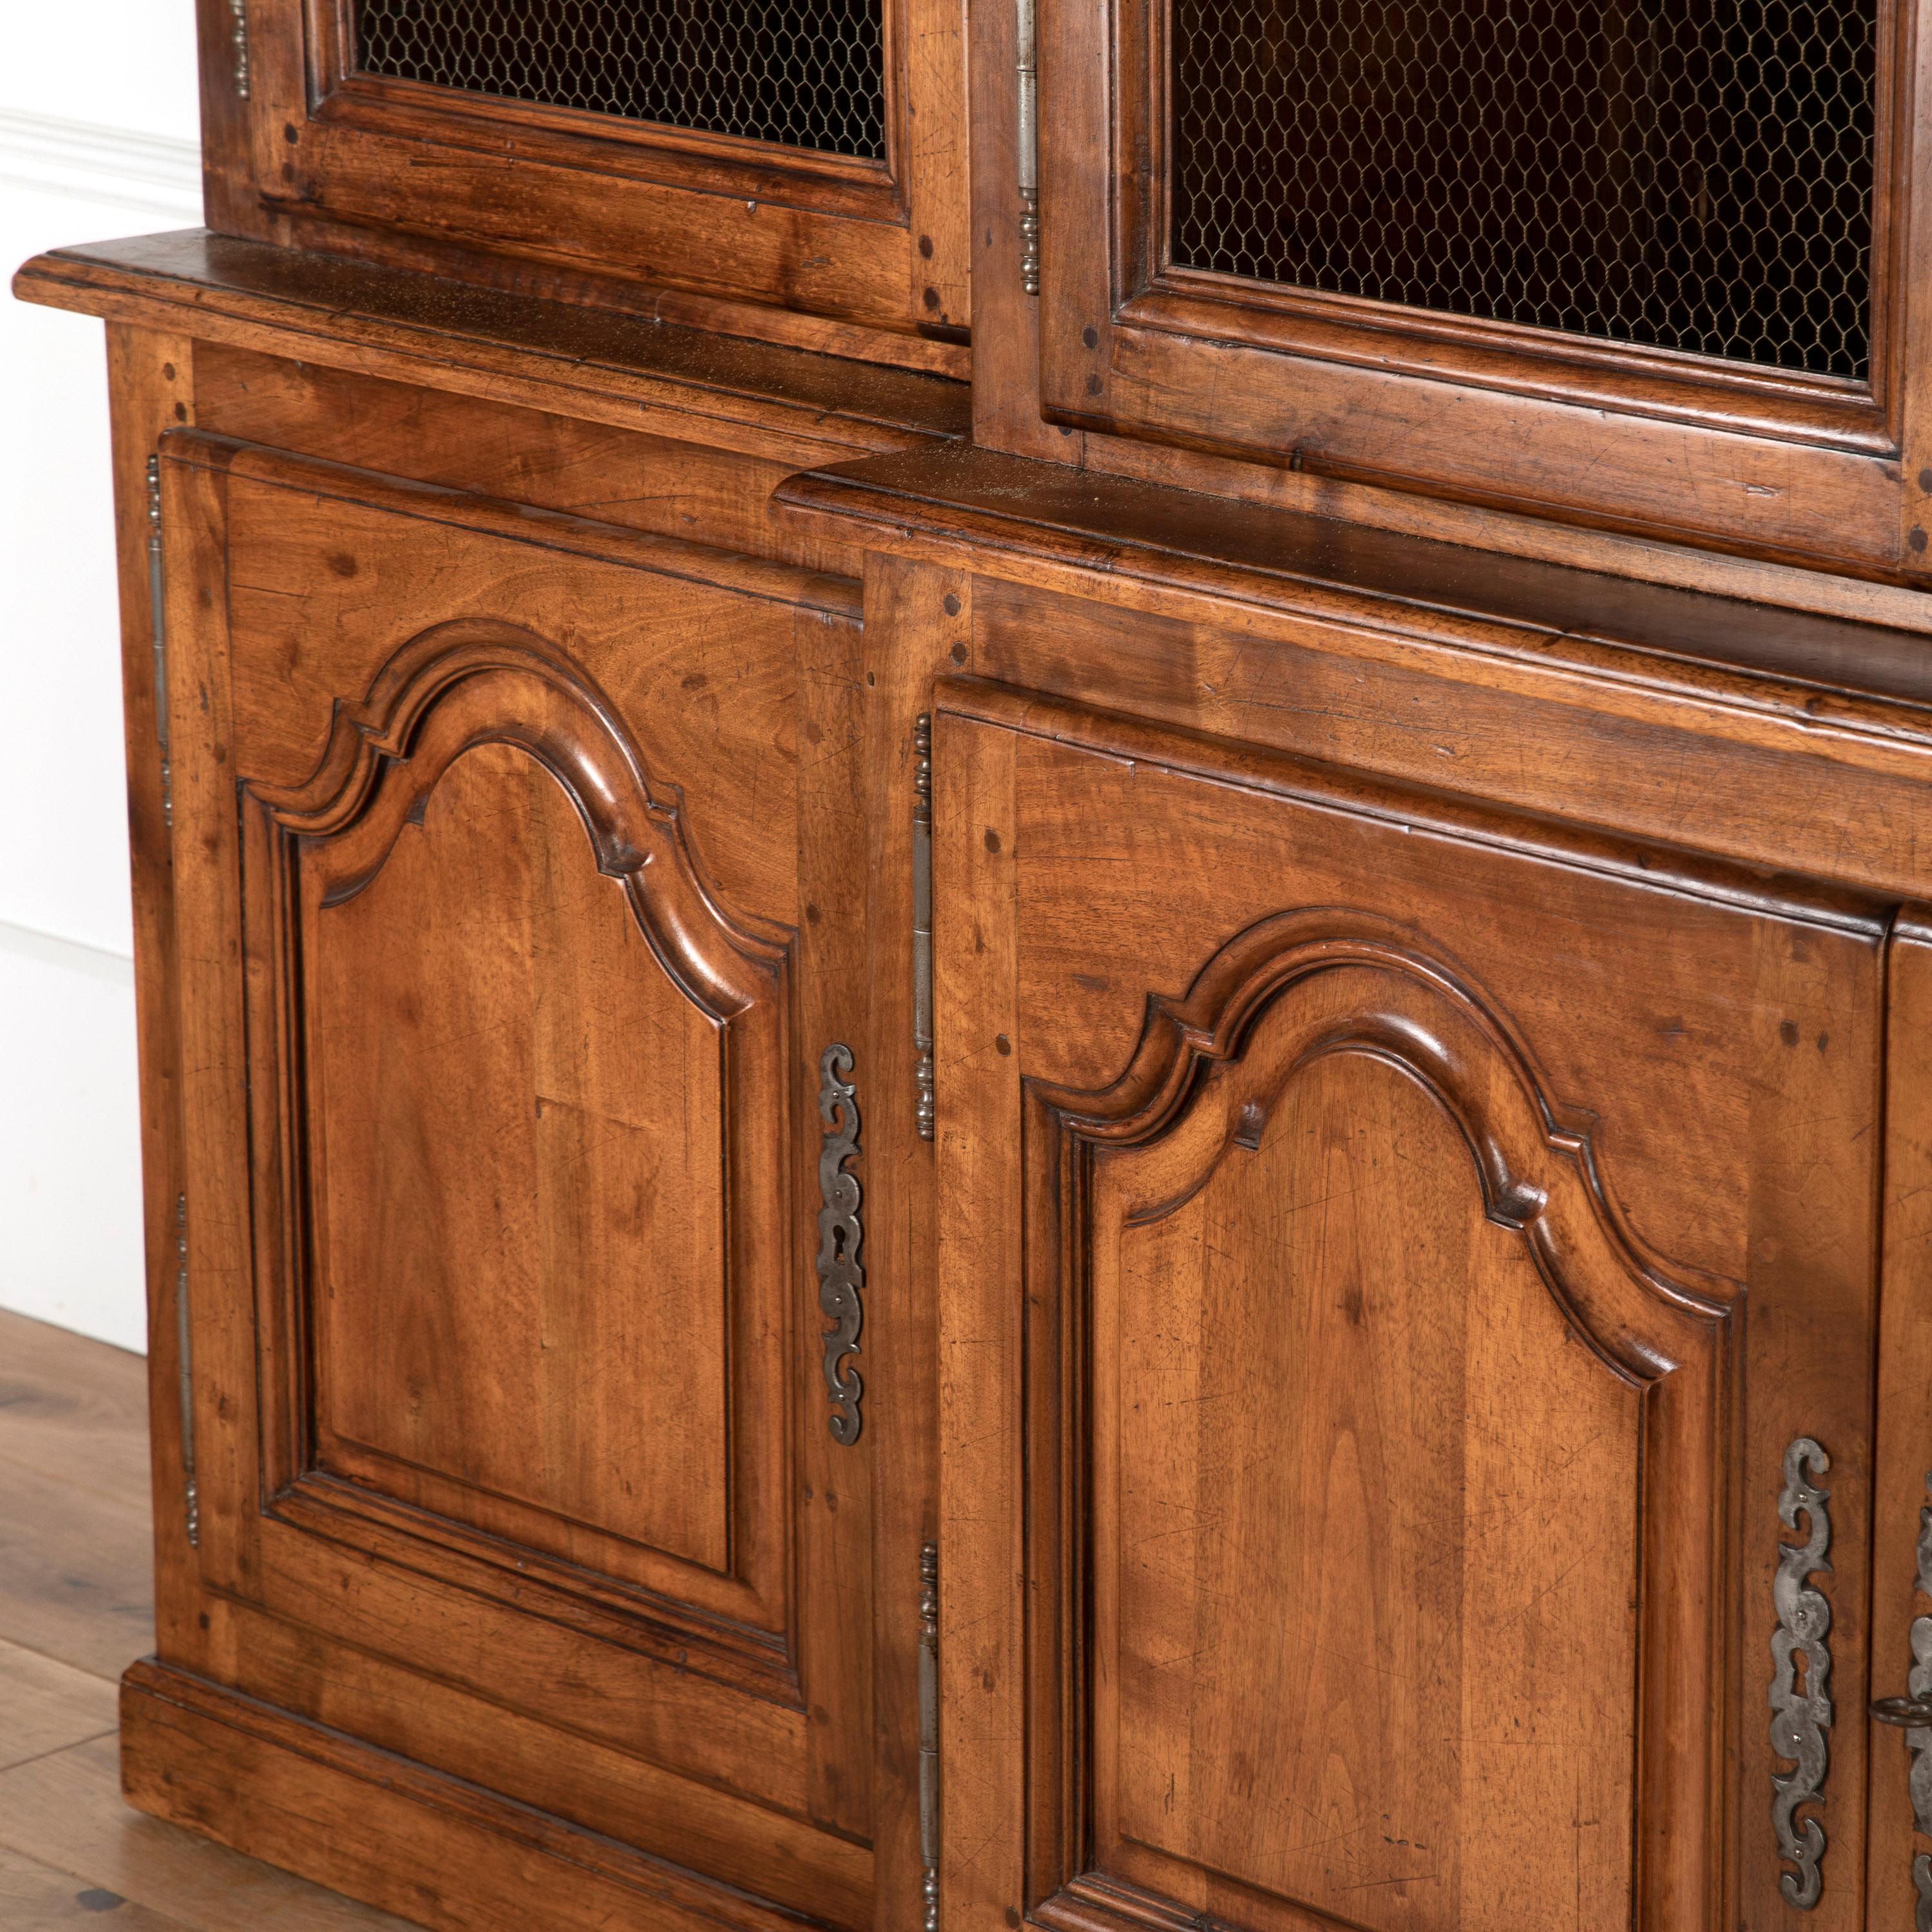 French breakfront Bibliotheque with wire to the upper doors.

Featuring traditional lift-off hinges and decorative escutcheons. All of the doors open with ease and also feature their original locks with keys. 

It has a wonderful, rich walnut